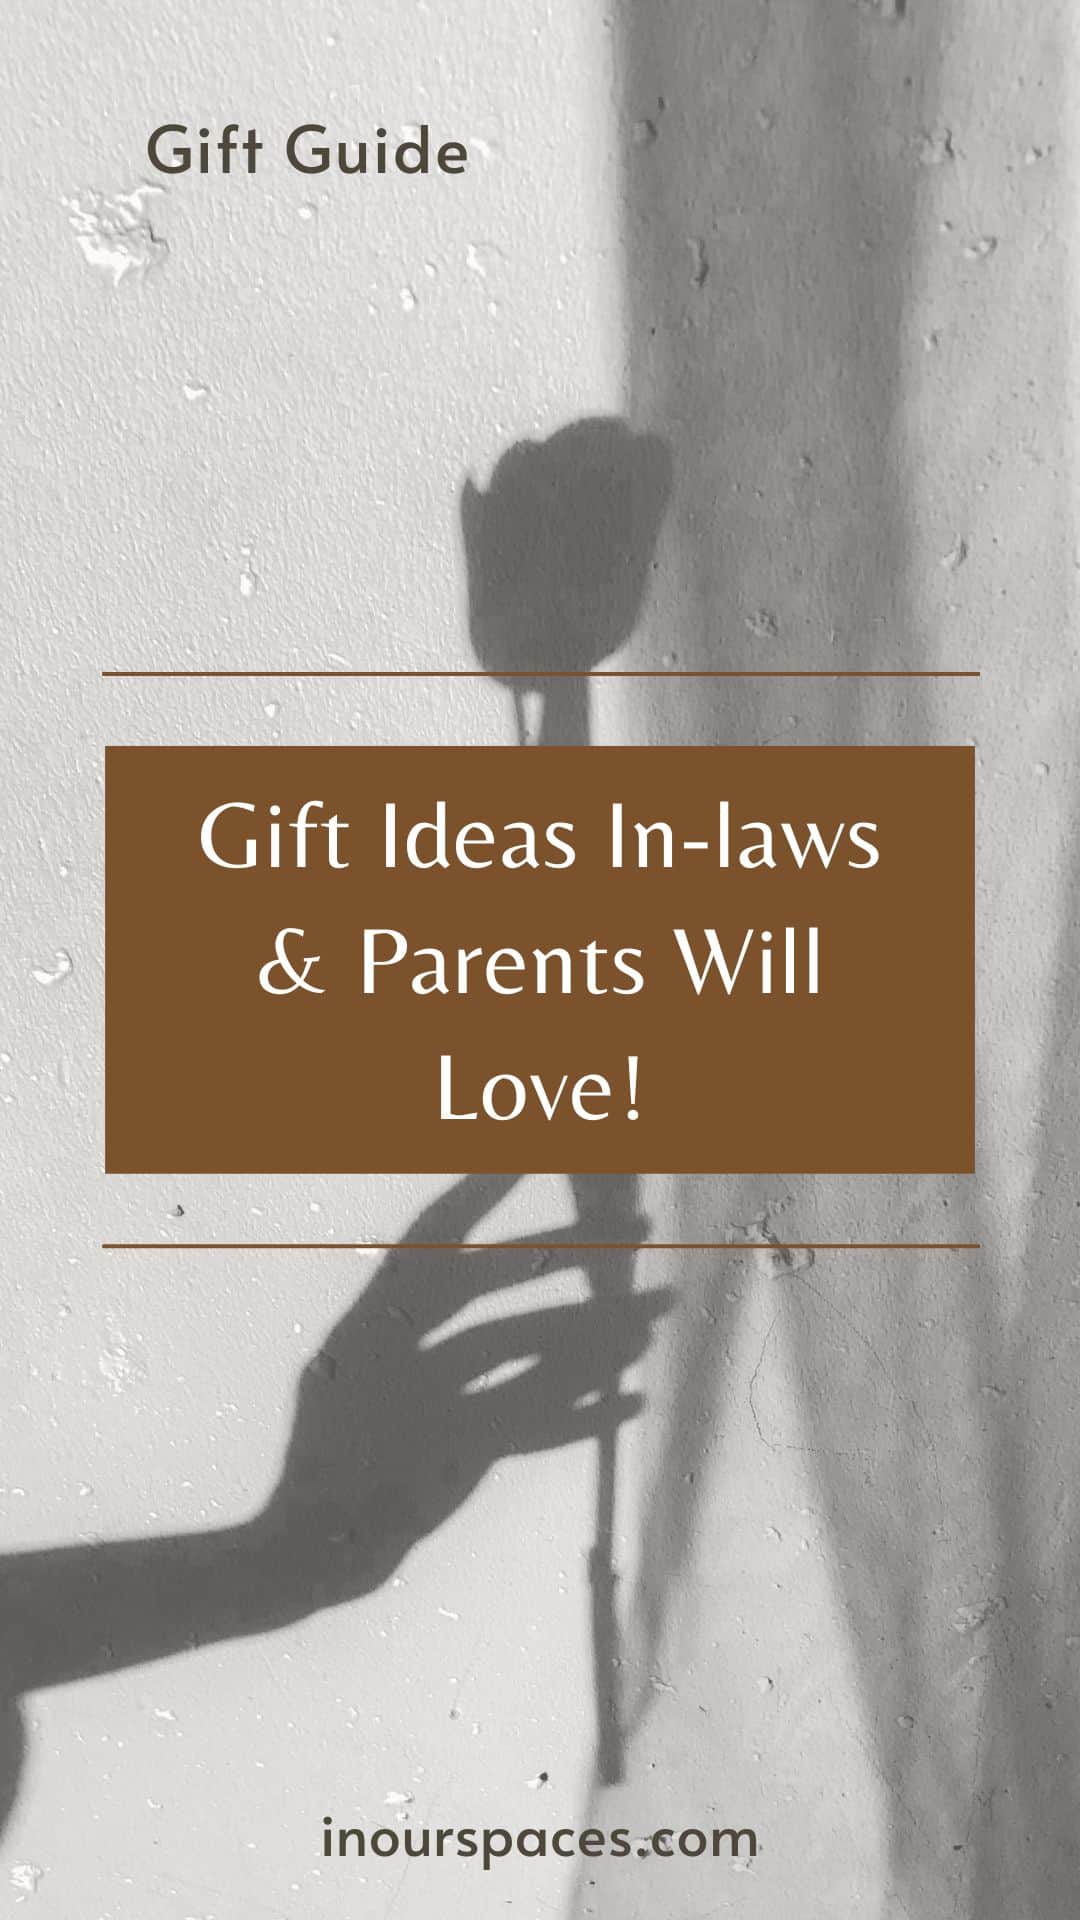 image with text. shadow image of female hand hold a rose, text reads gift guide, gifts ideas in-laws parents grandparents and others couples will love in our spaces dot com